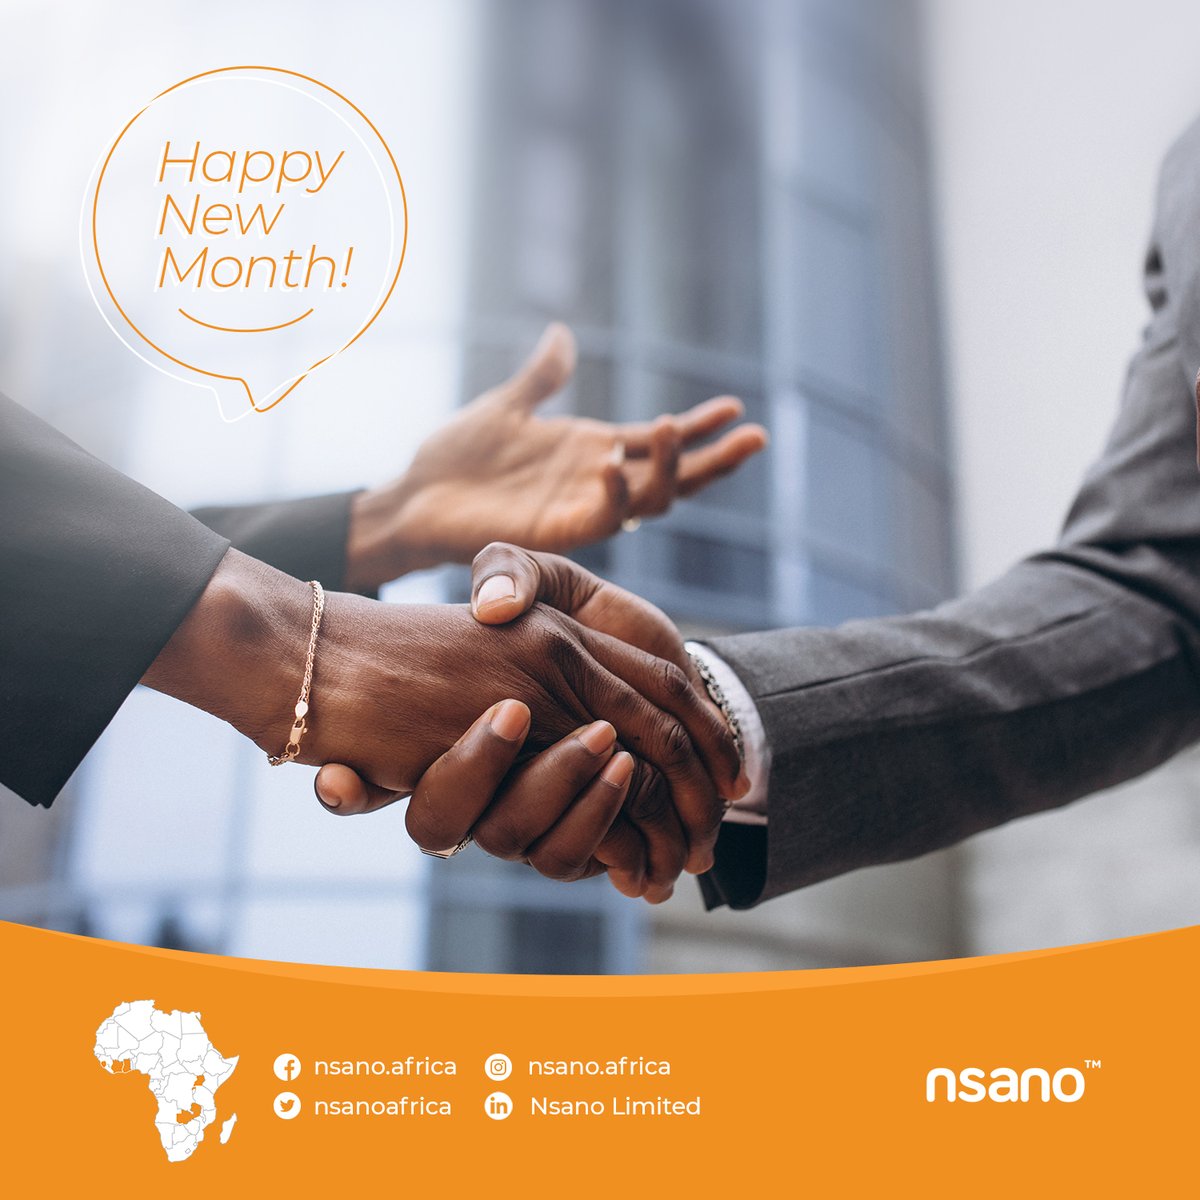 Happy new month! Let’s help you achieve optimum results in your business with our products.

Call us on 0302909018. Let us help your business grow.

#Nsano #NewMonth https://t.co/edGtEcP0Vz